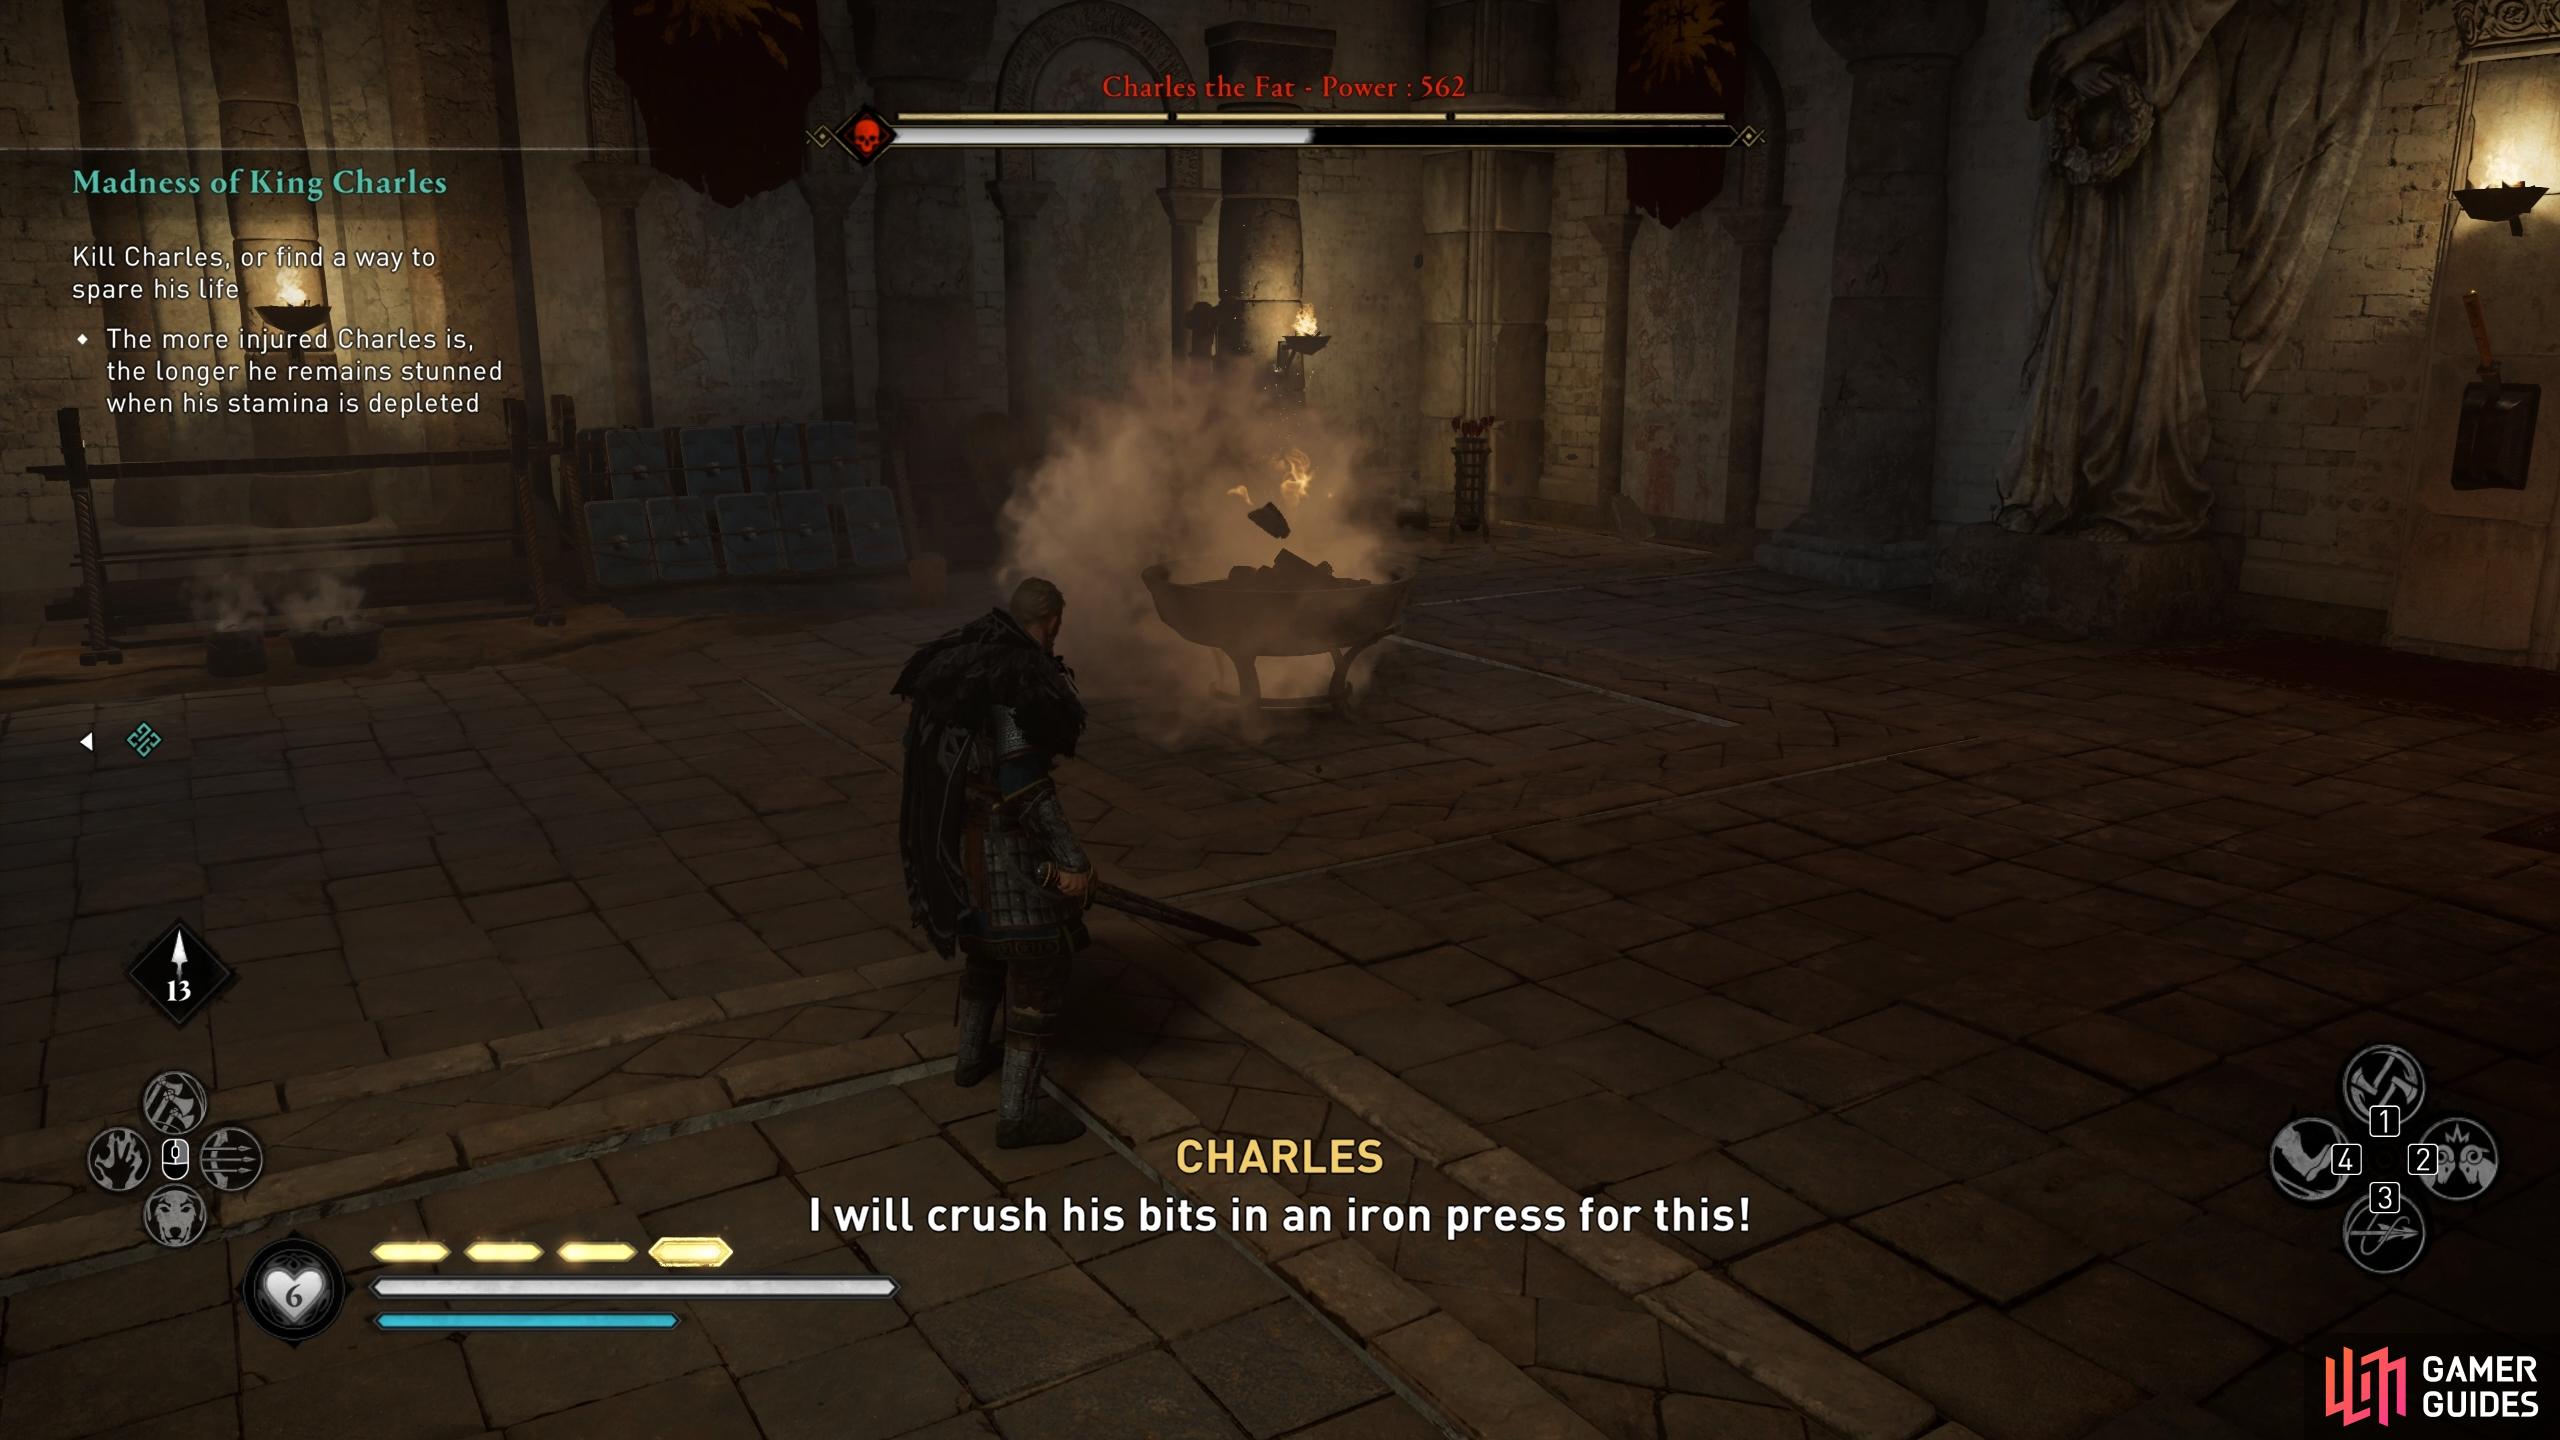 After throwing Charles into two braziers, he'll begin to extinguish the fires by throwing rocks at them.